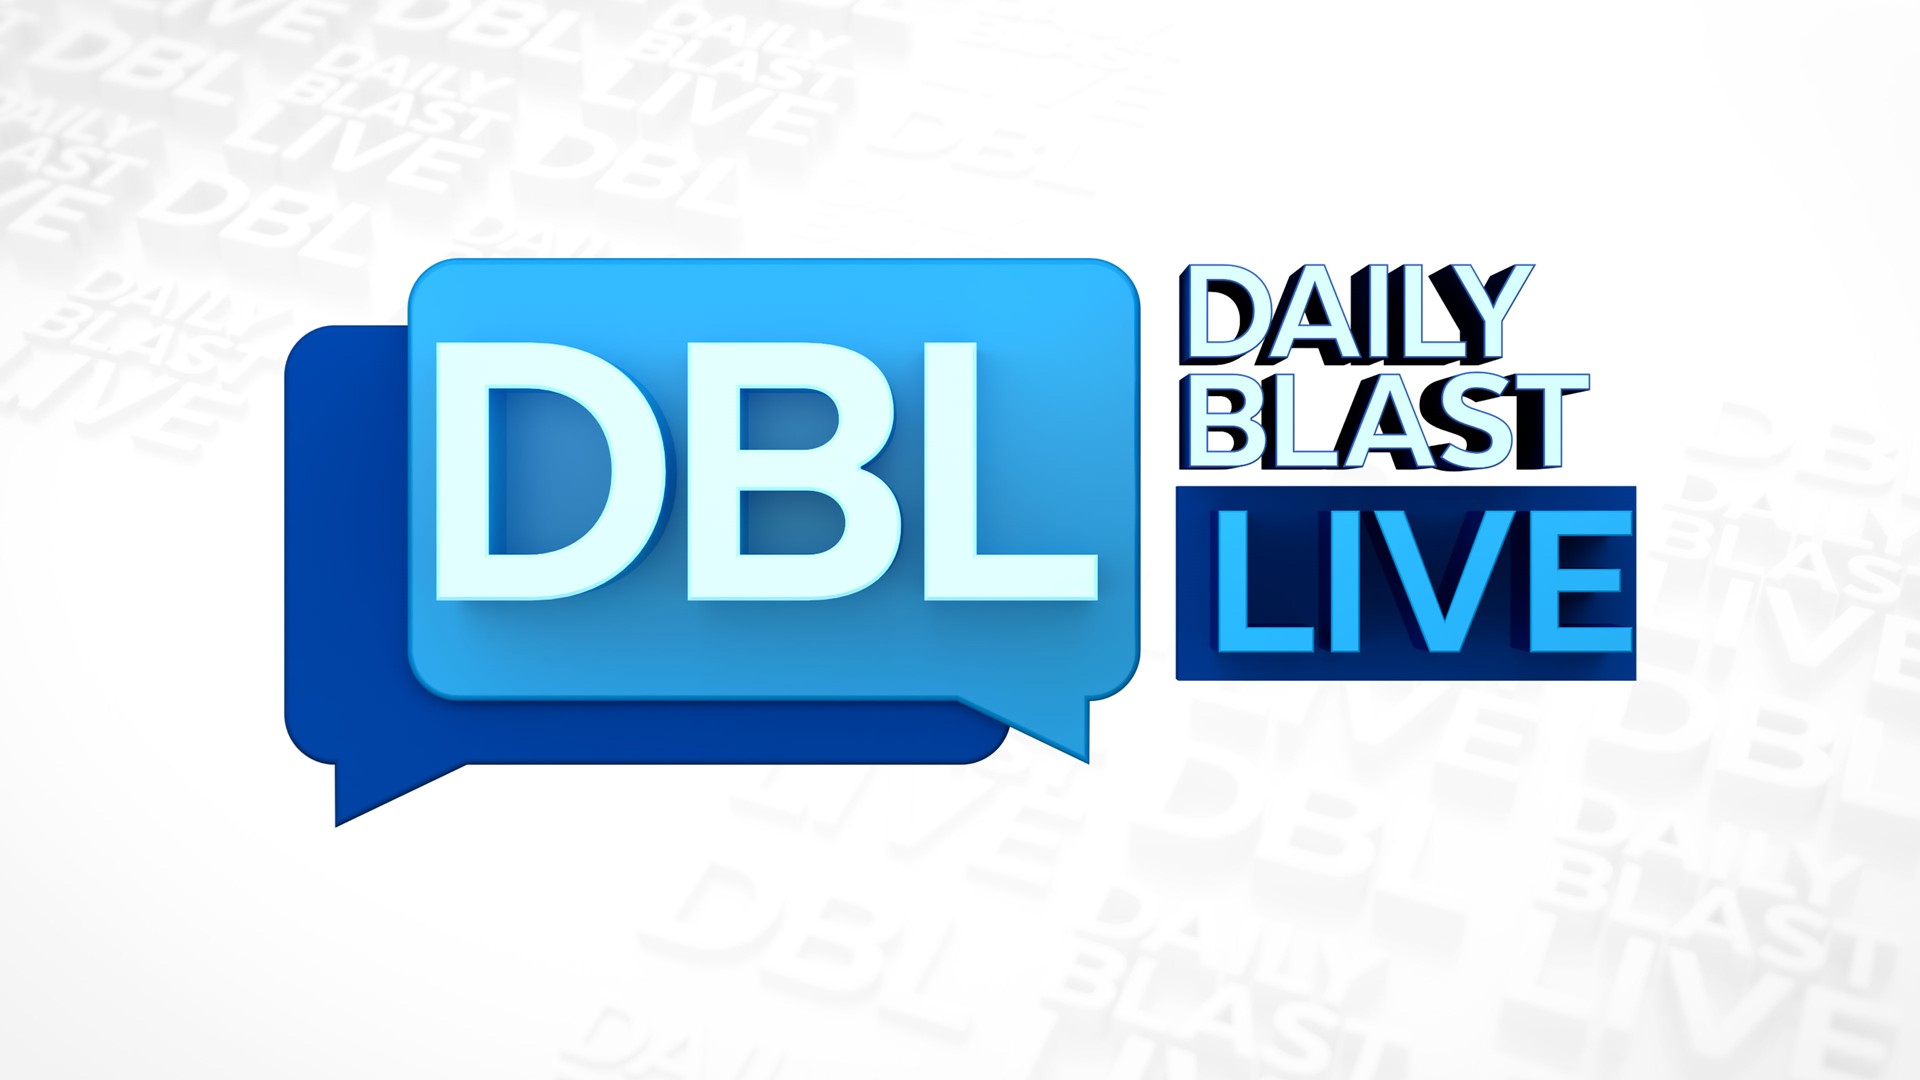 DBL discusses trending stories with viewers on TV and online, delivering a fun, entertaining and exciting look at the changing world in real time.